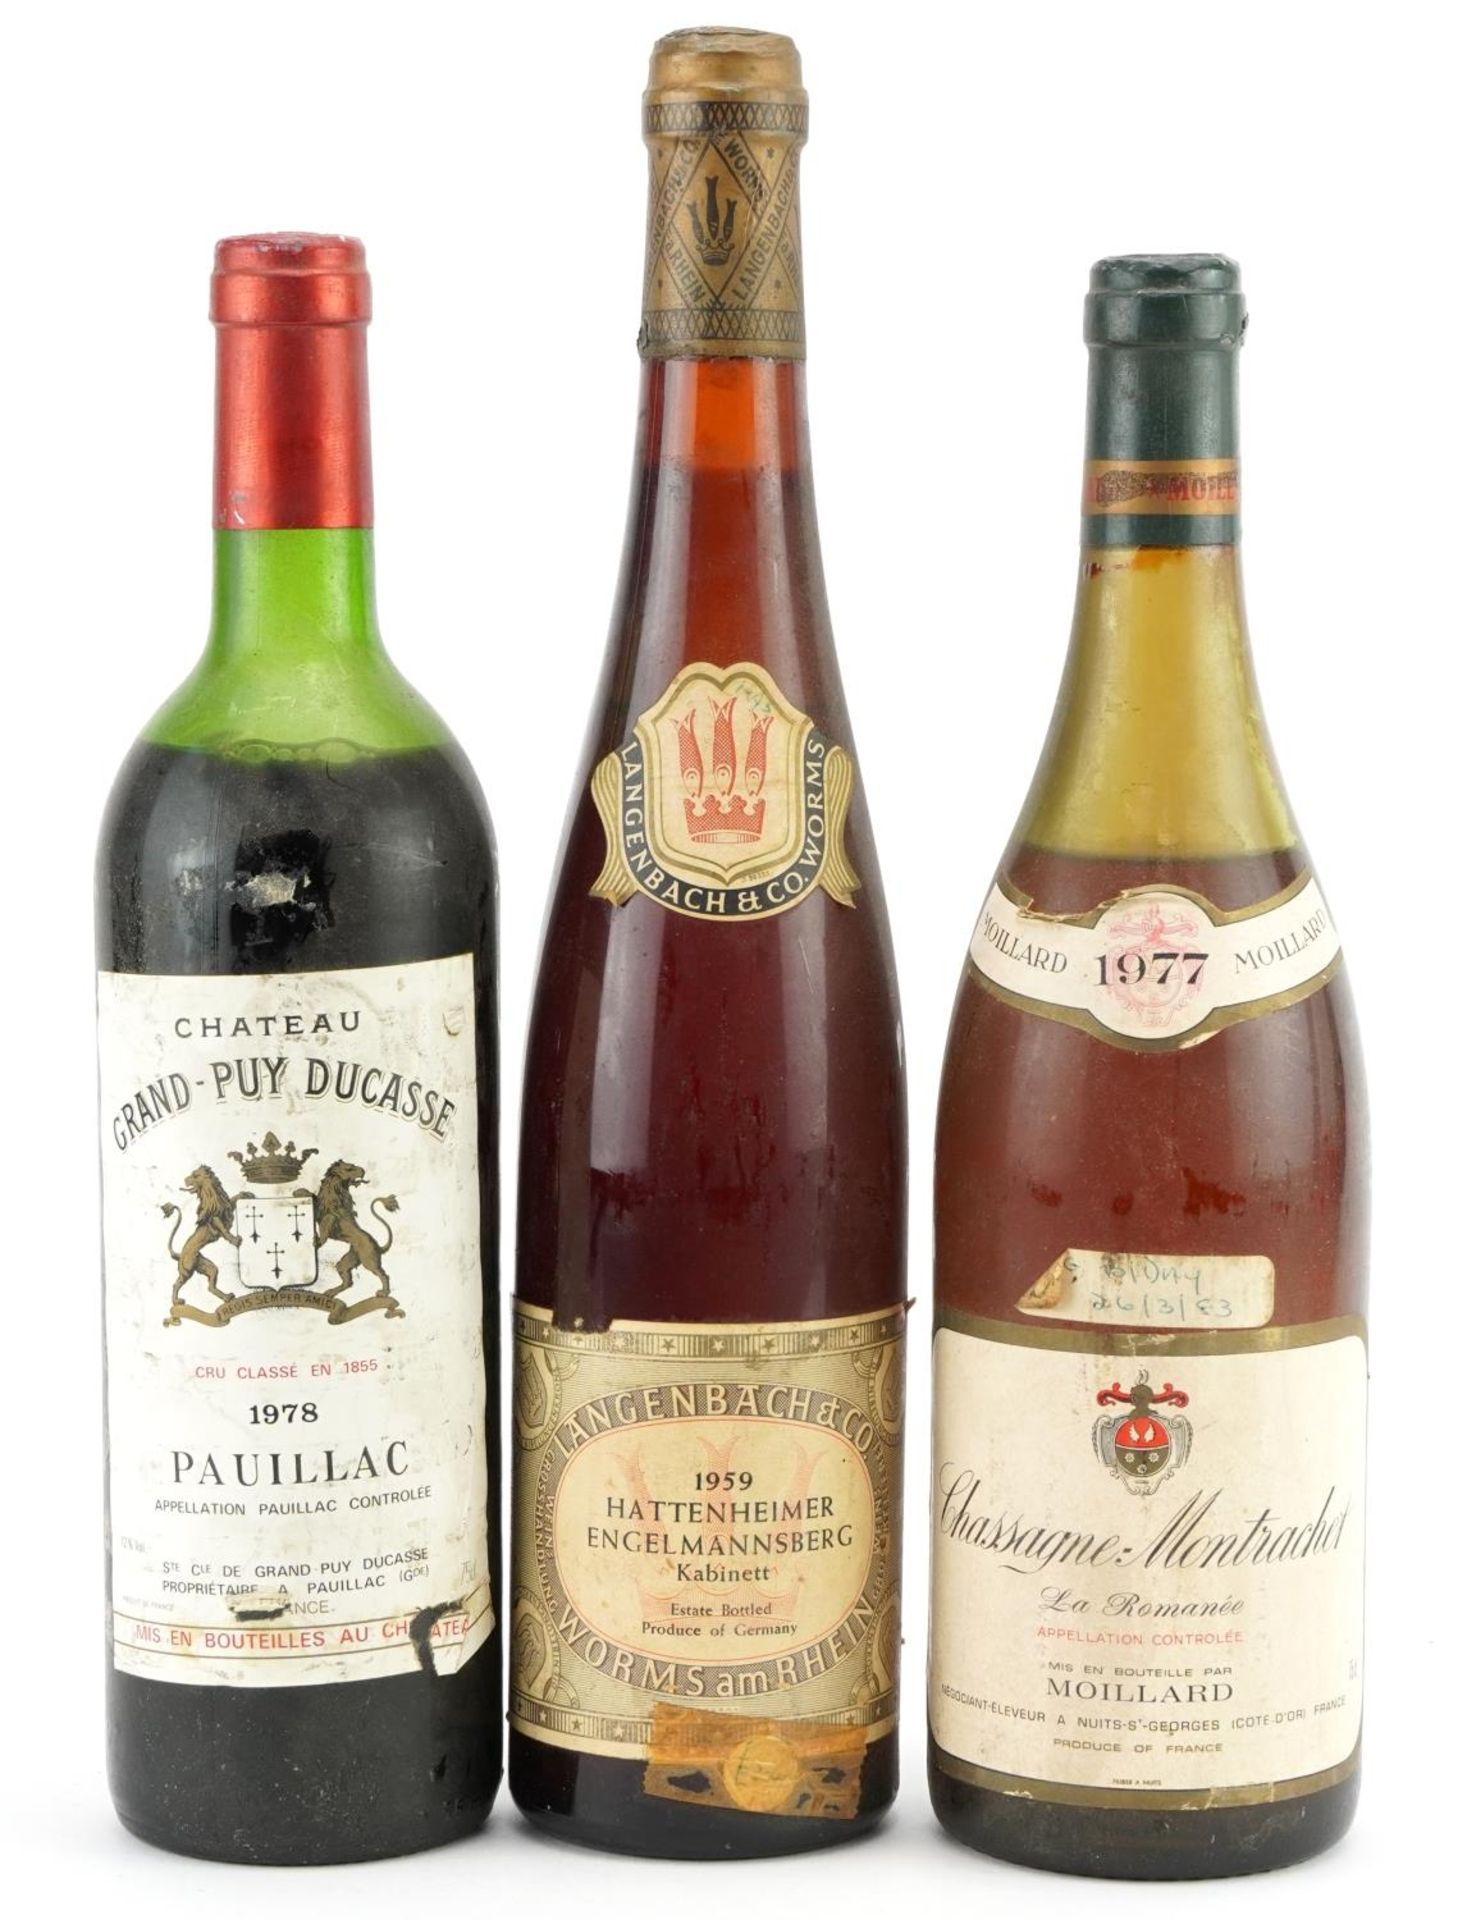 Three bottles of wine comprising bottle of 1978 Chateau Grand Puy Ducasse Pauillac, 1959